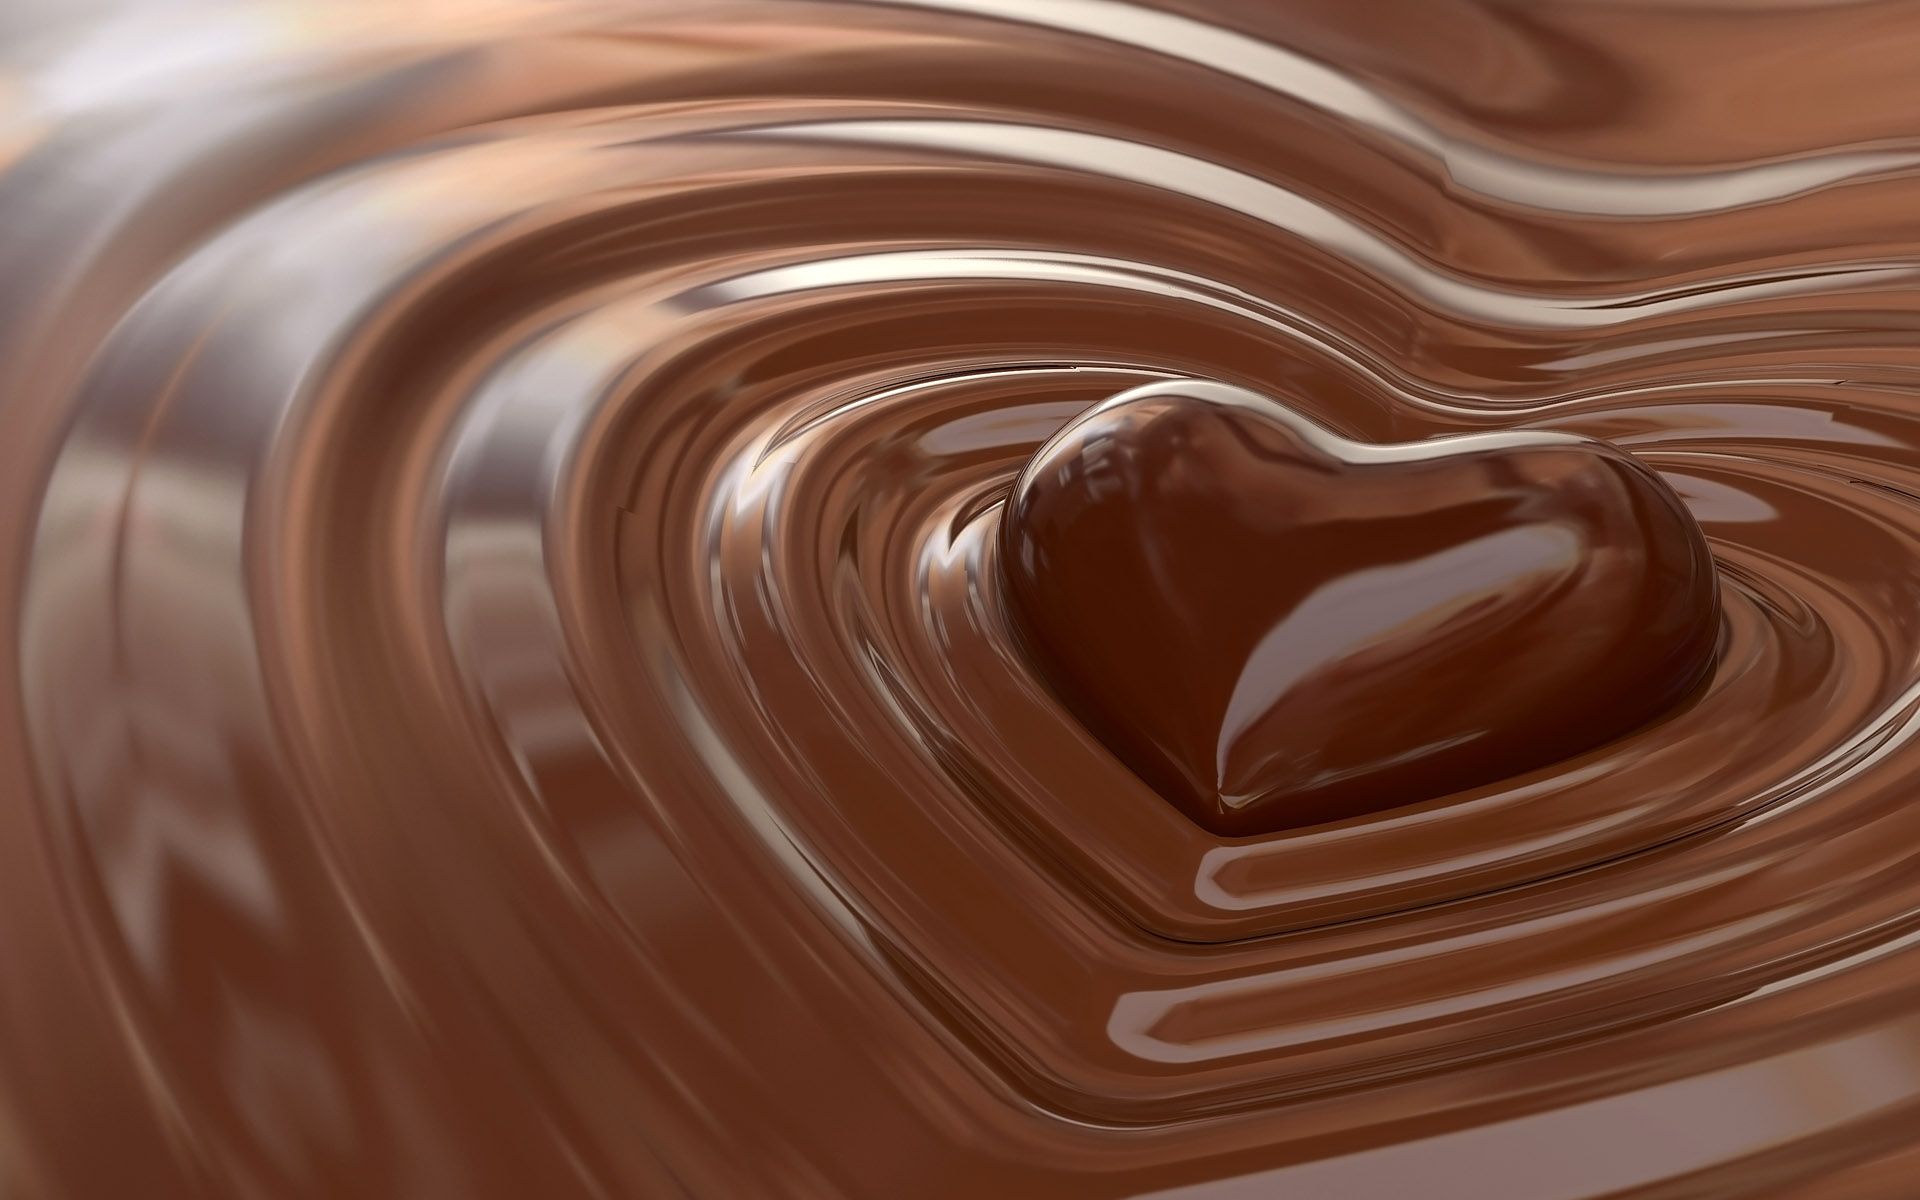 Free download Chocolate Wallpaper Picture Pics Photo Image